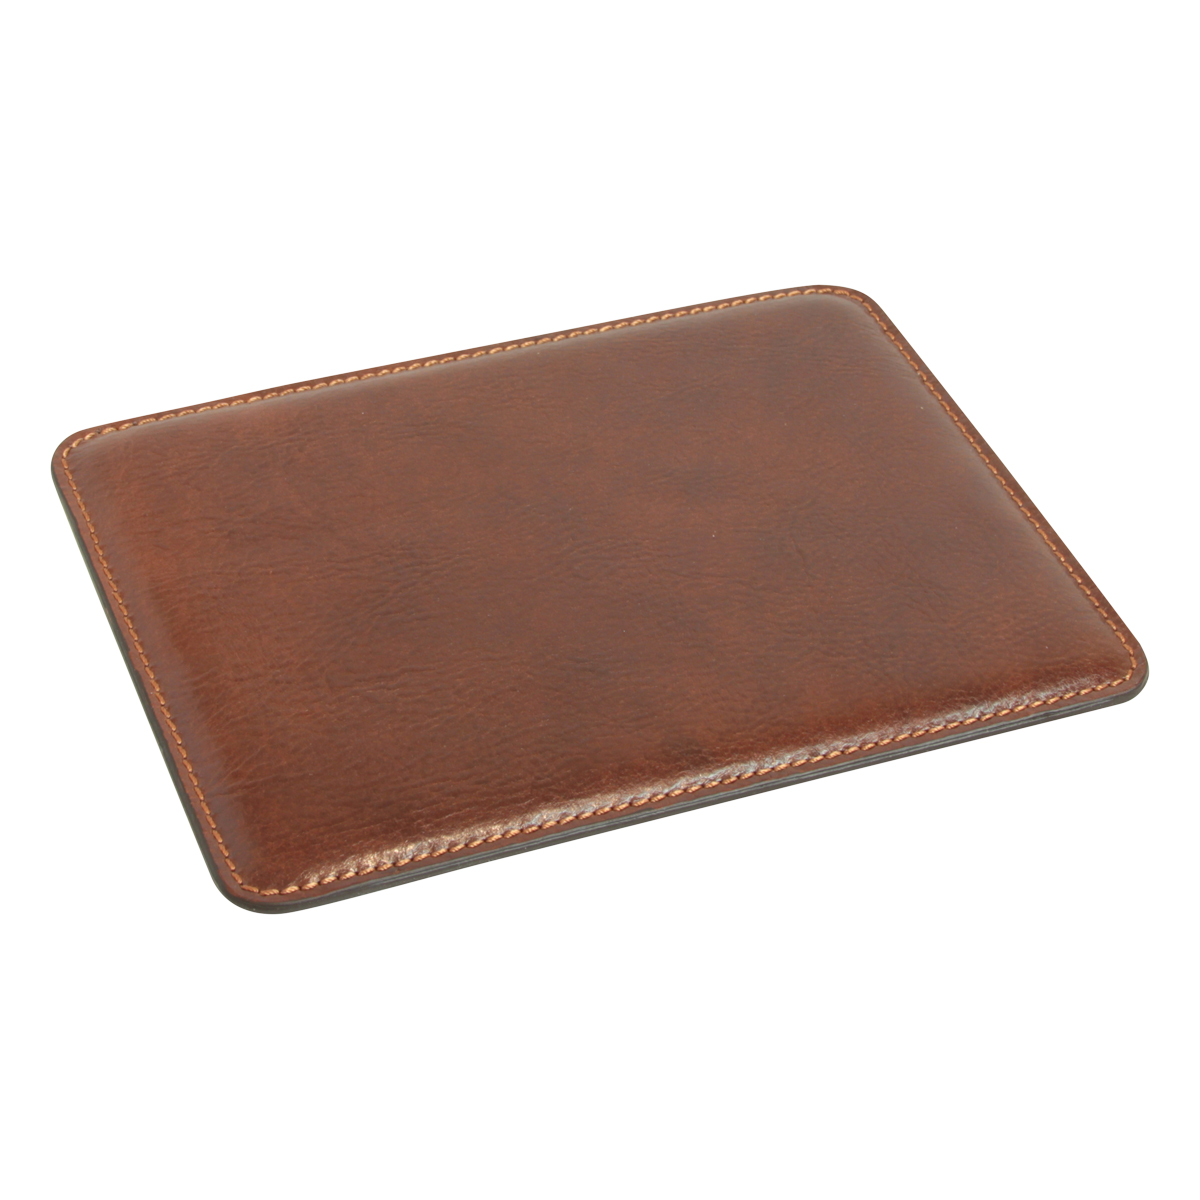 Leather Mouse pad - Brown | 752005MA US | Old Angler Firenze